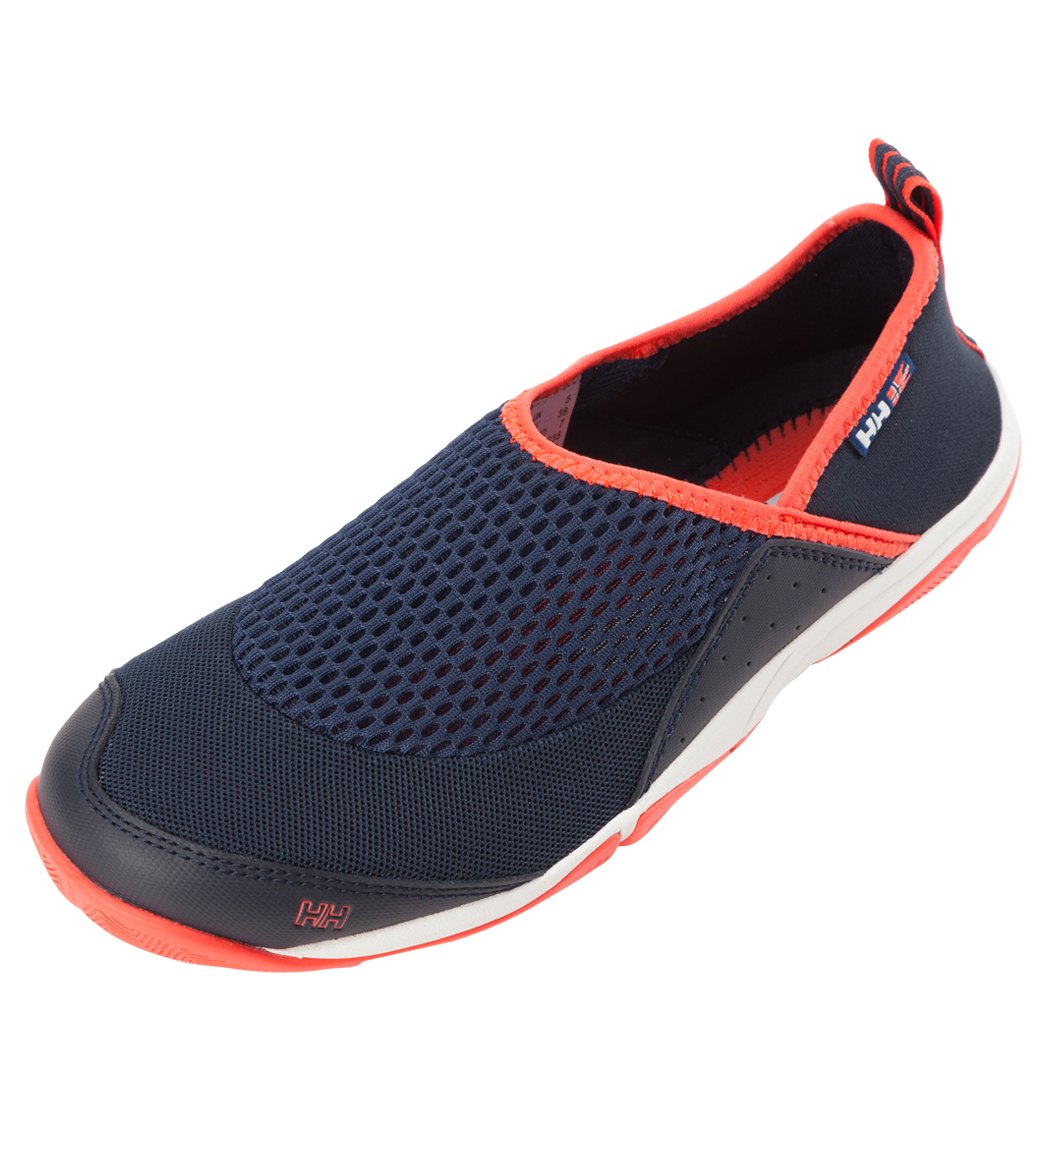 Helly Hansen Women's Watermoc 2 Water Shoes at SwimOutlet.com - Free ...